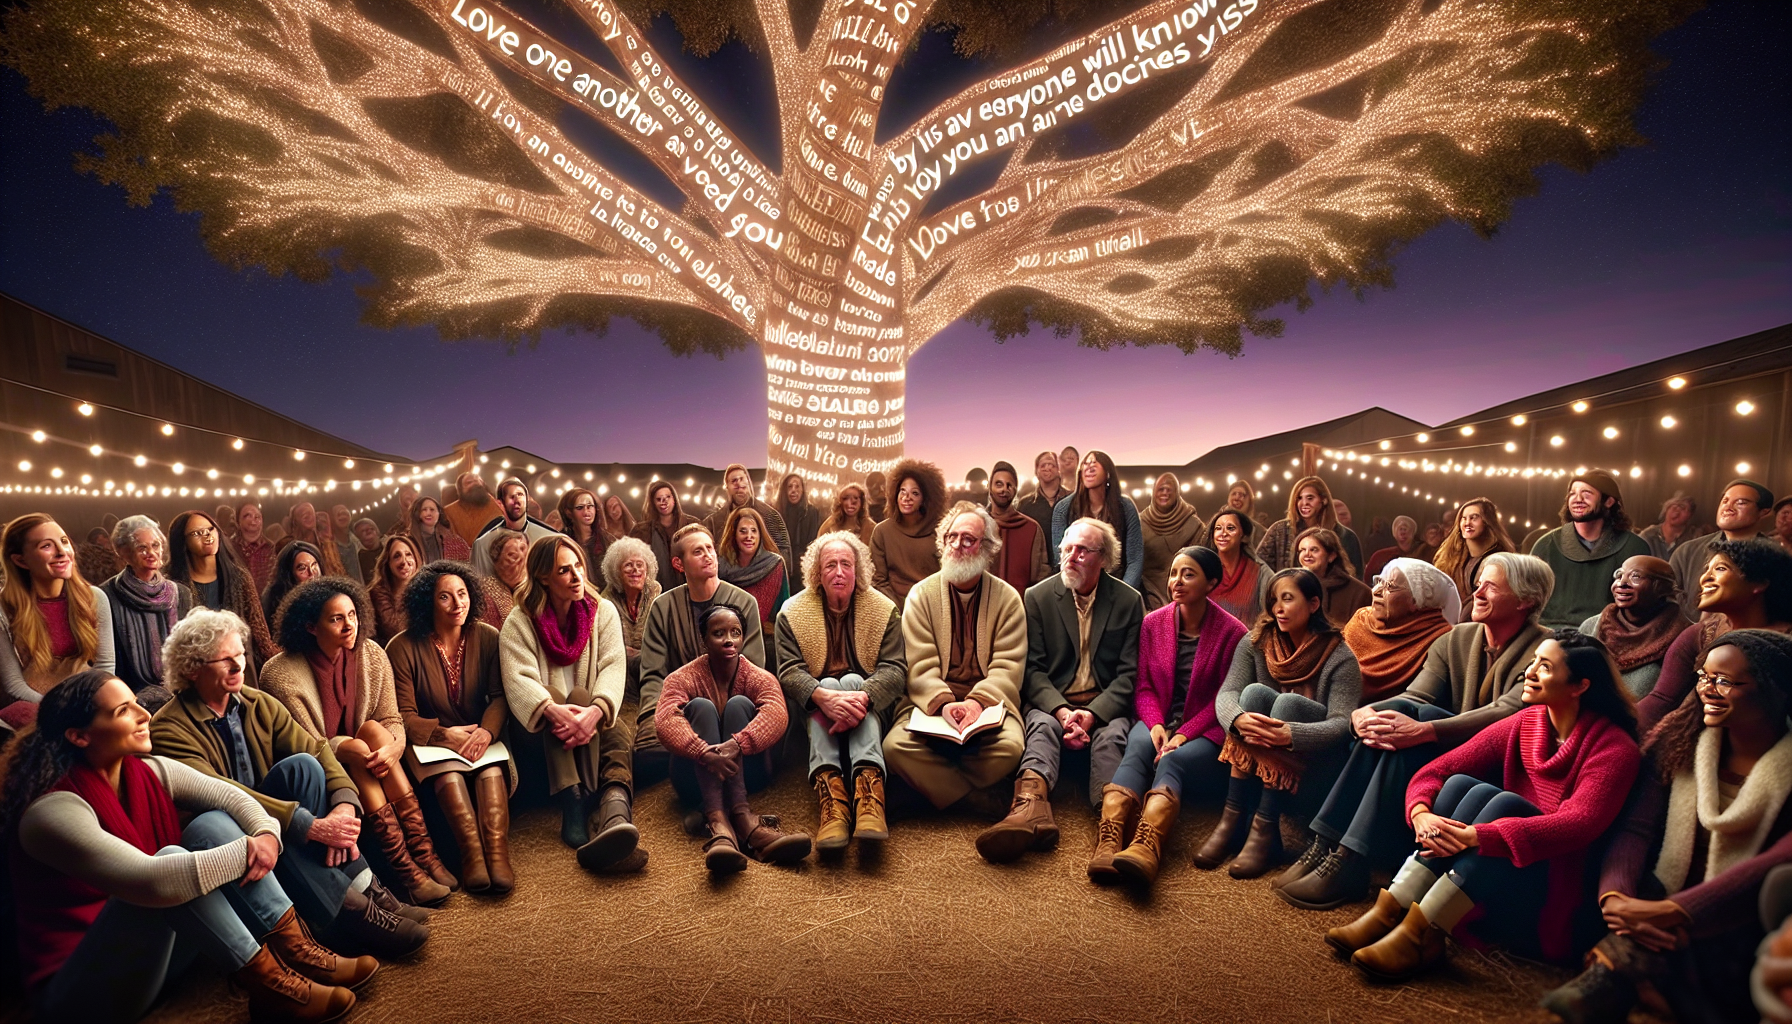 Create an image of a diverse group of people of different ethnicities, ages, and backgrounds, sitting together in a circle, sharing stories and smiling warmly under a large tree draped with shimmering